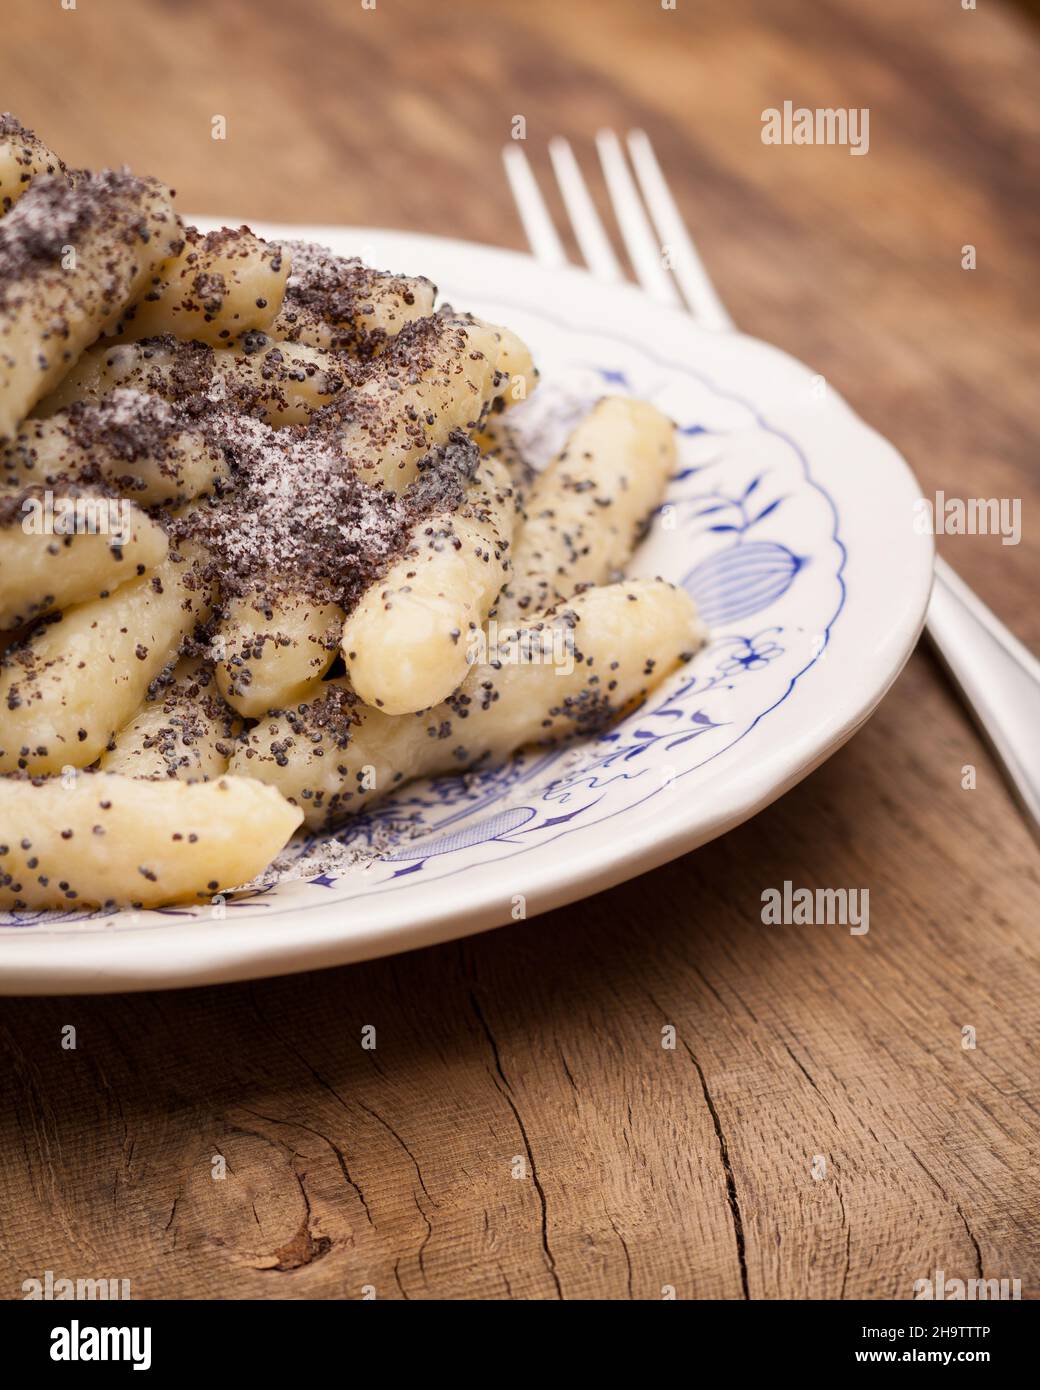 poppy seed noodles, wood, table, pasta, Austria, sweet, dish, poppy, typical, dessert, potato, bread crumbs, pastries, icing sugar, white, wooden tabl Stock Photo